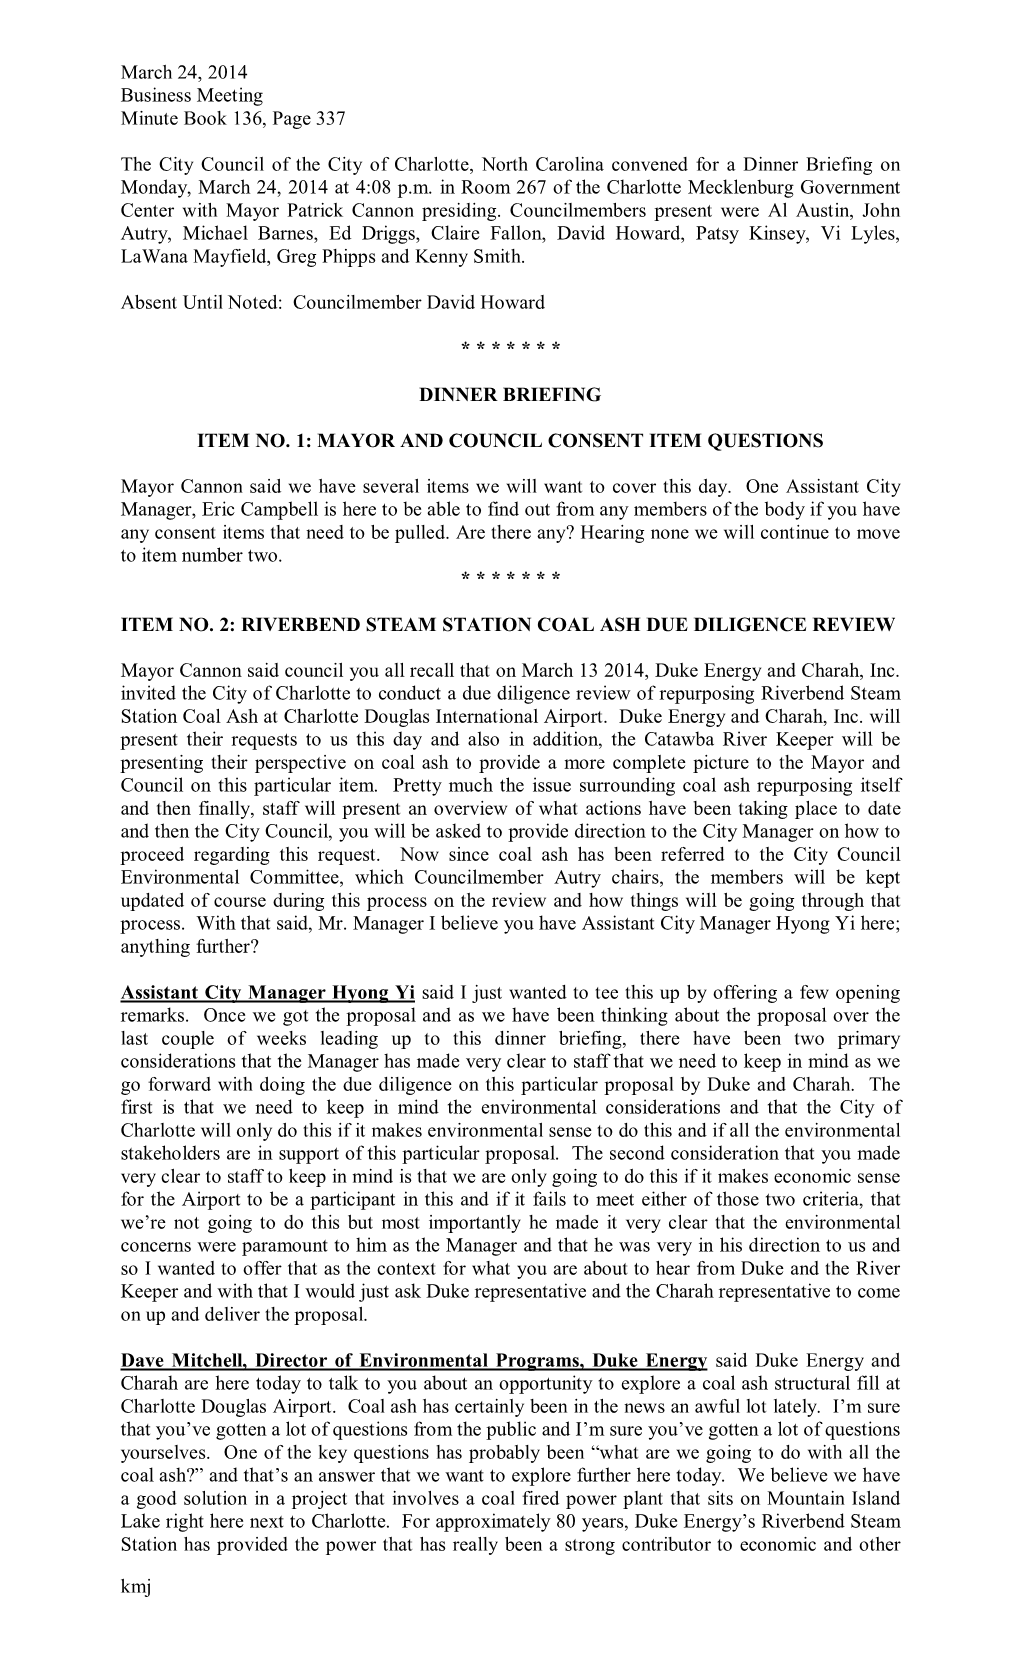 March 24, 2014 Business Meeting Minute Book 136, Page 337 Kmj the City Council of the City of Charlotte, North Carolina Convened